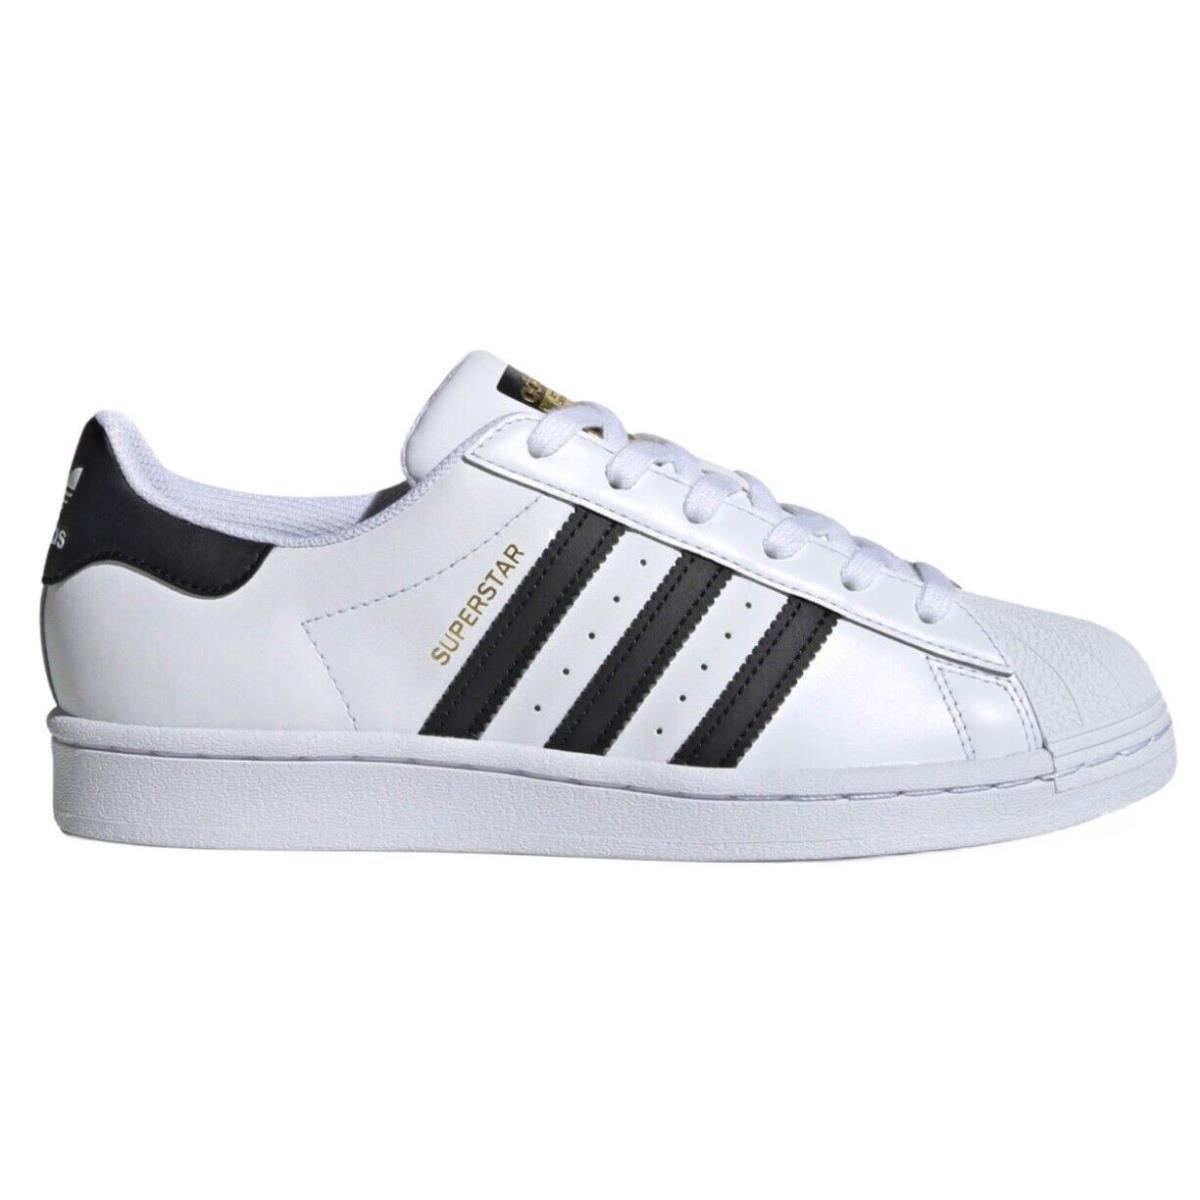 Adidas Superstar Womens FV3284 White Black Leather Shell Toe Shoes - White, way: Cloud White / Core Black / Cloud White